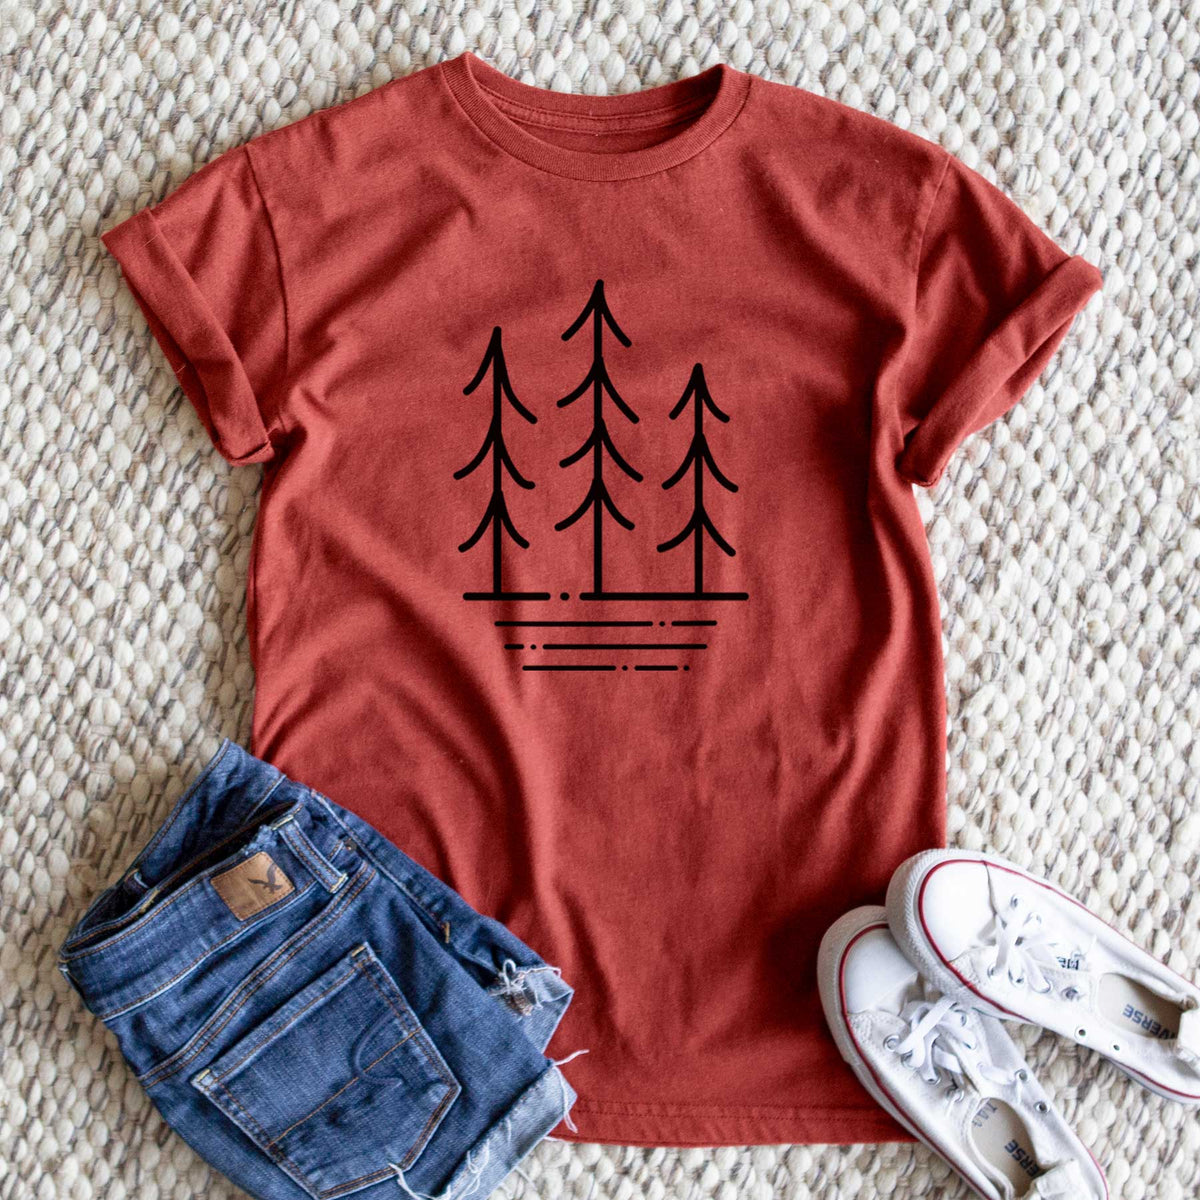 Three Trees - Unisex Recycled Eco Tee  - CLOSEOUT - FINAL SALE